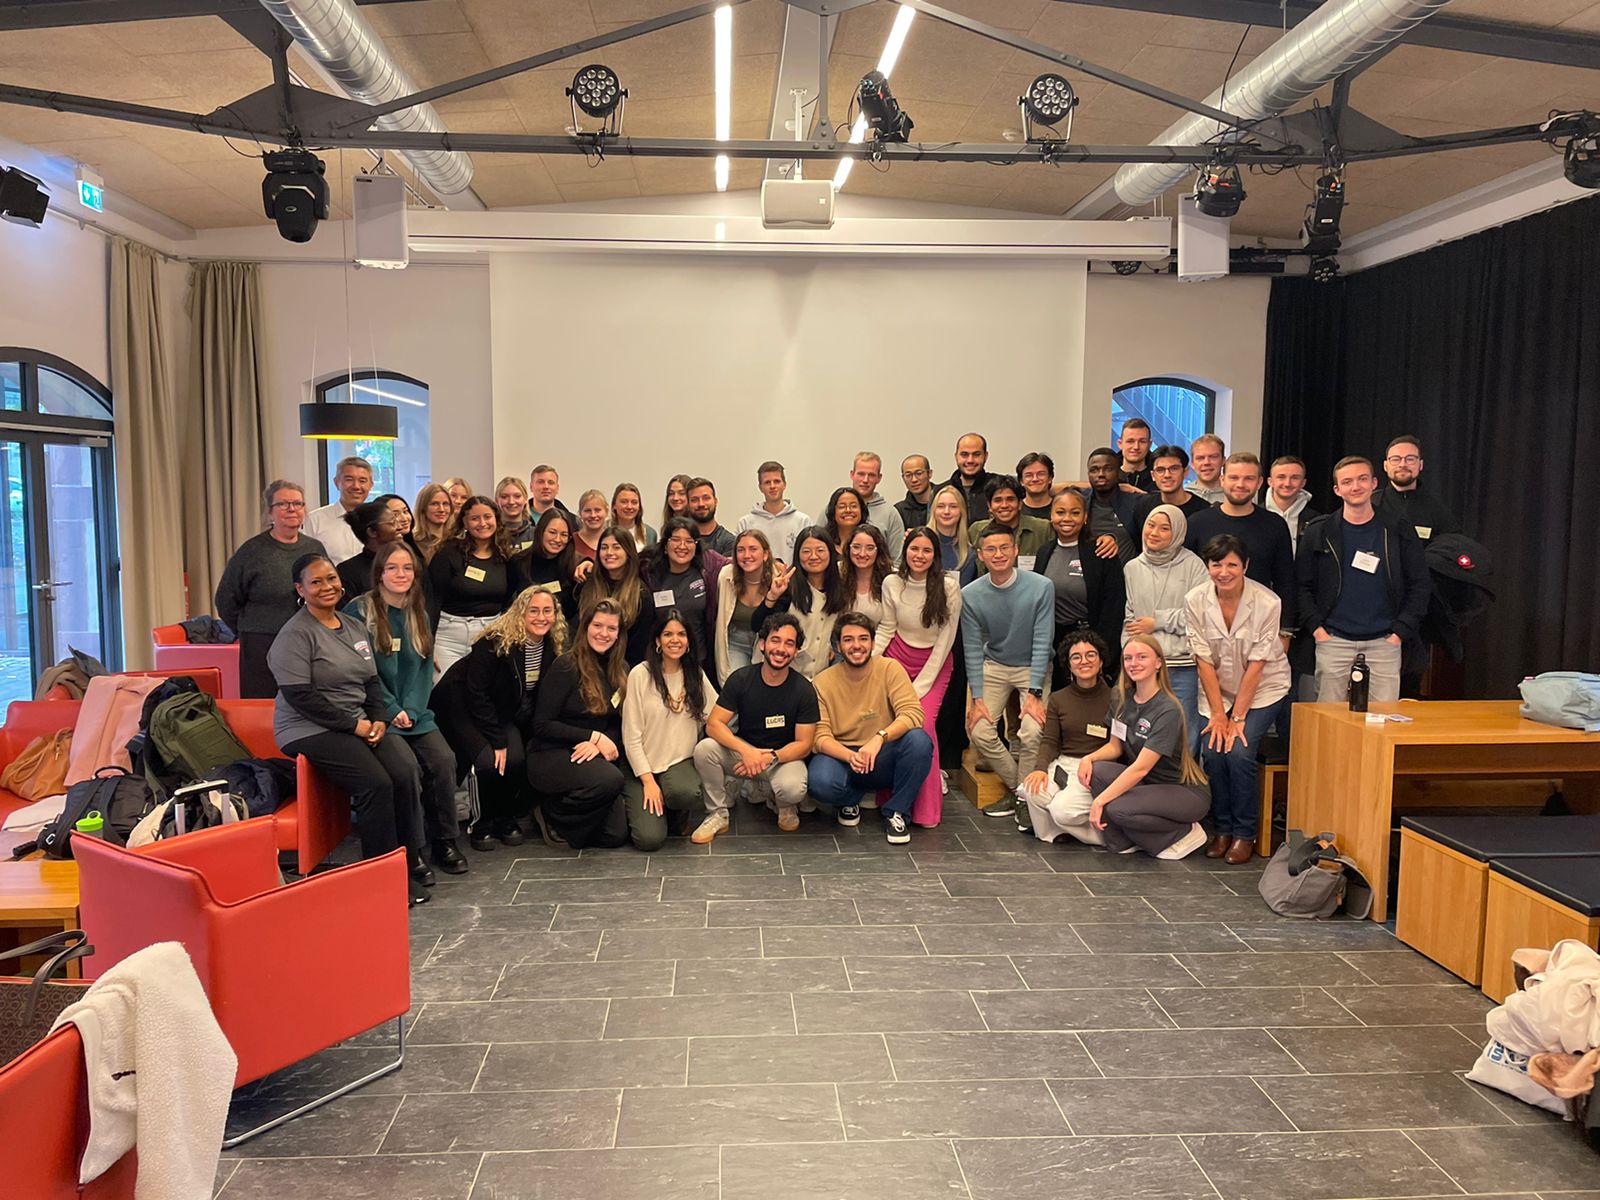 Blockweek takes UEM students to participate in actions in Germany